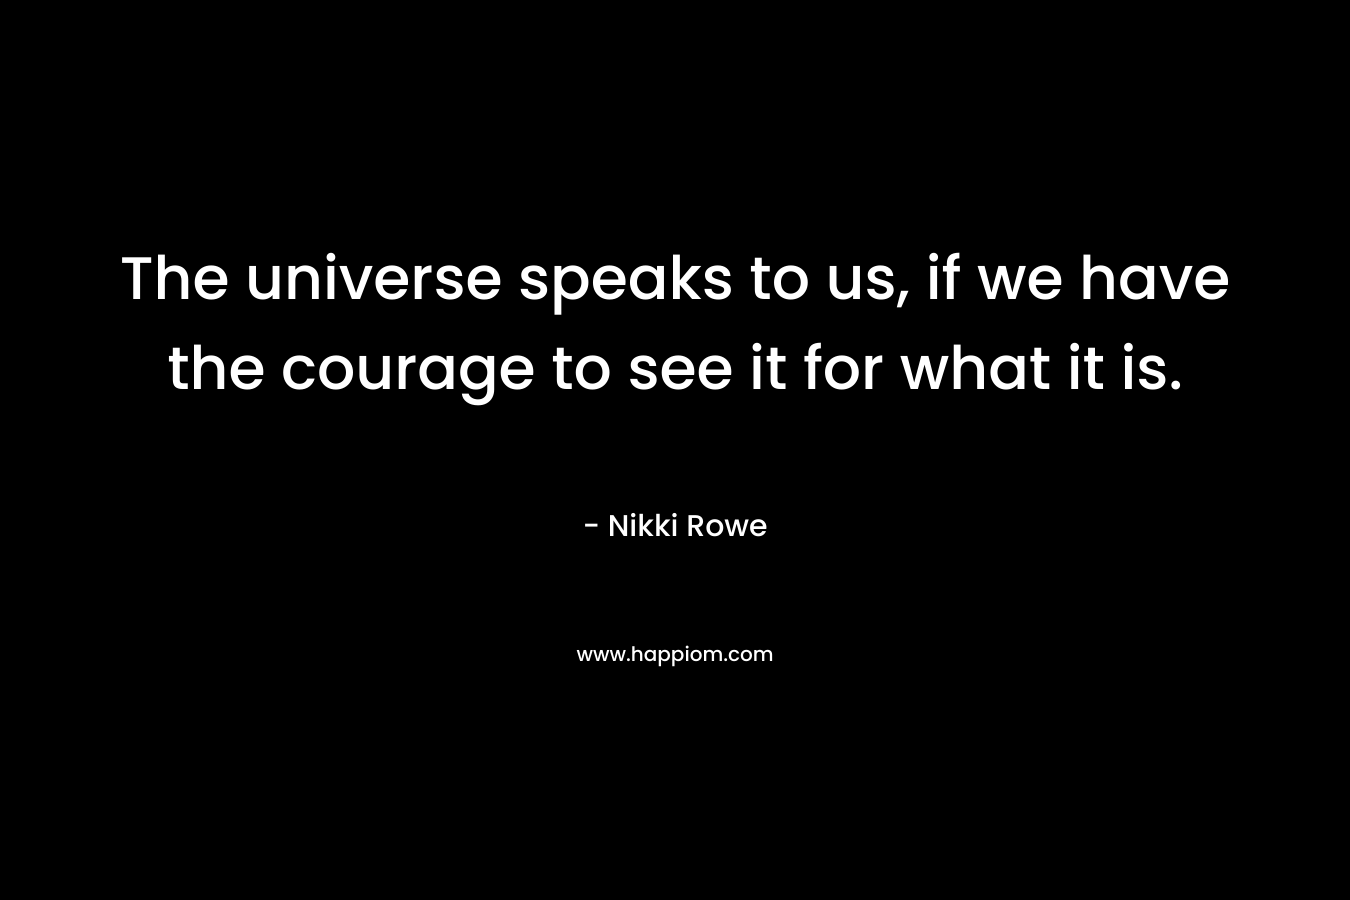 The universe speaks to us, if we have the courage to see it for what it is. – Nikki Rowe